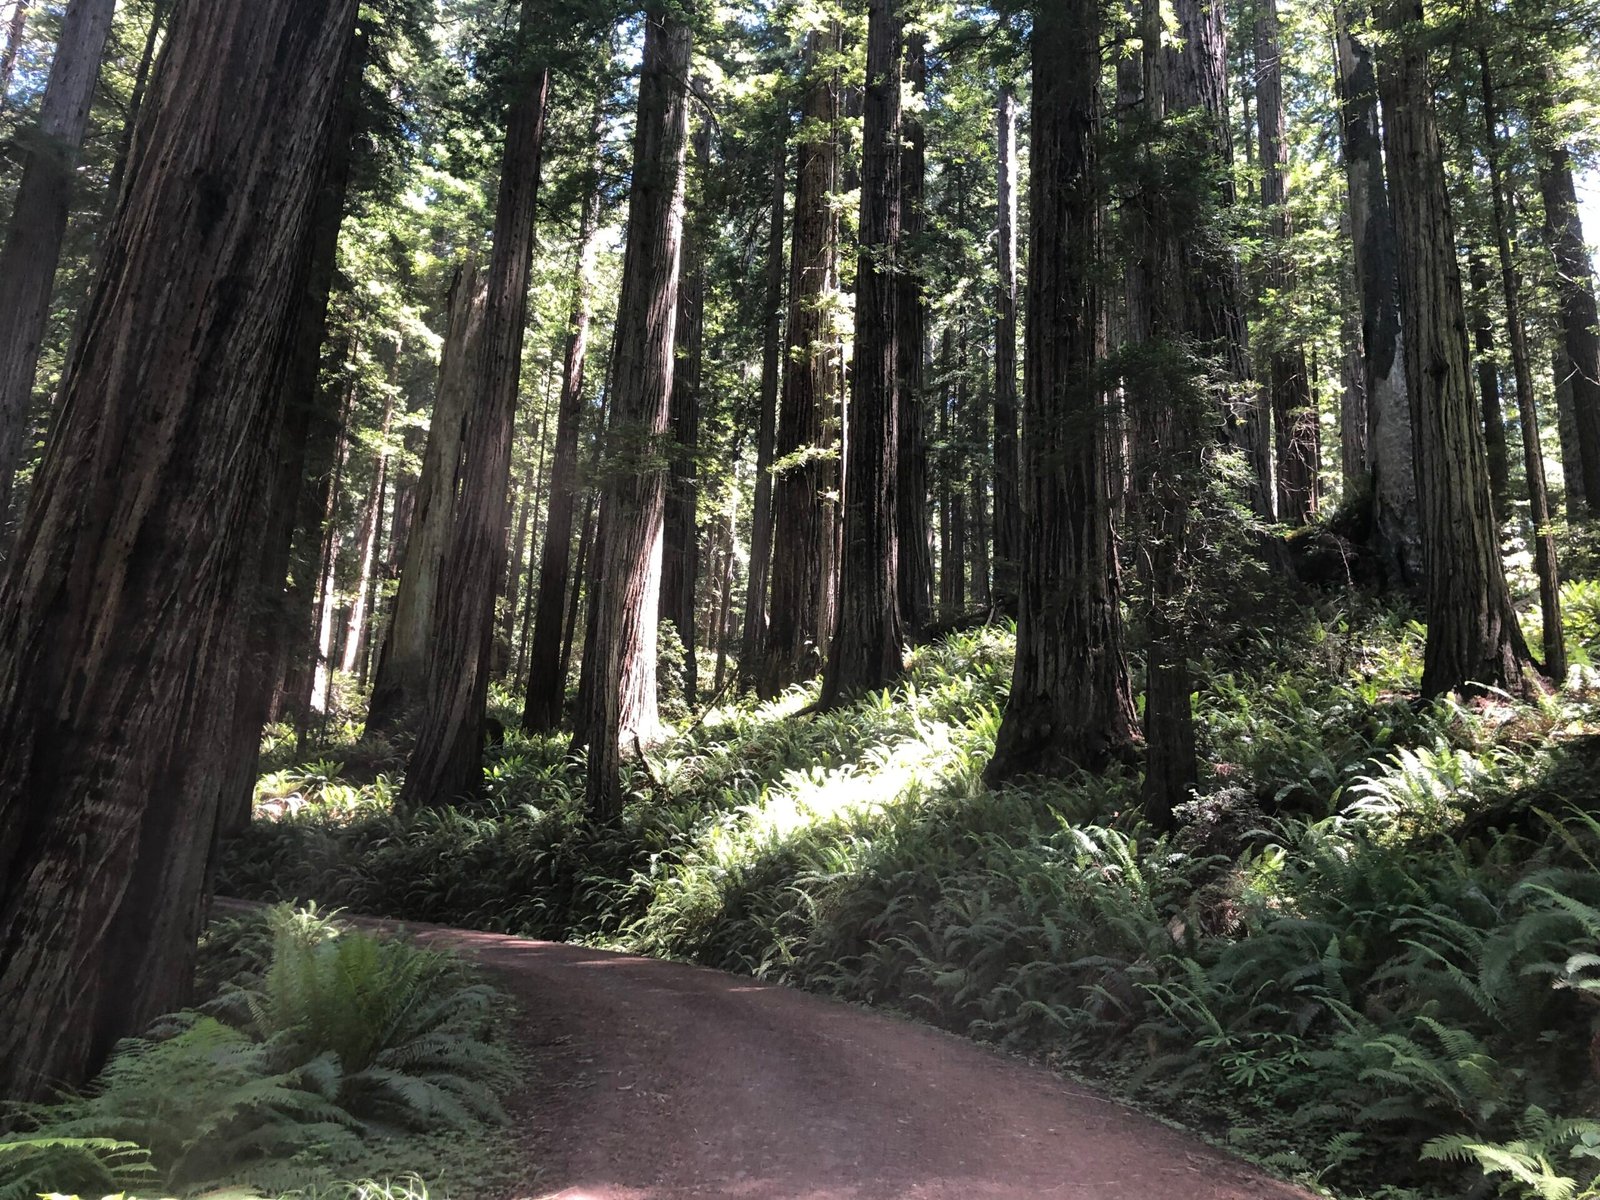 Driving through the Redwoods